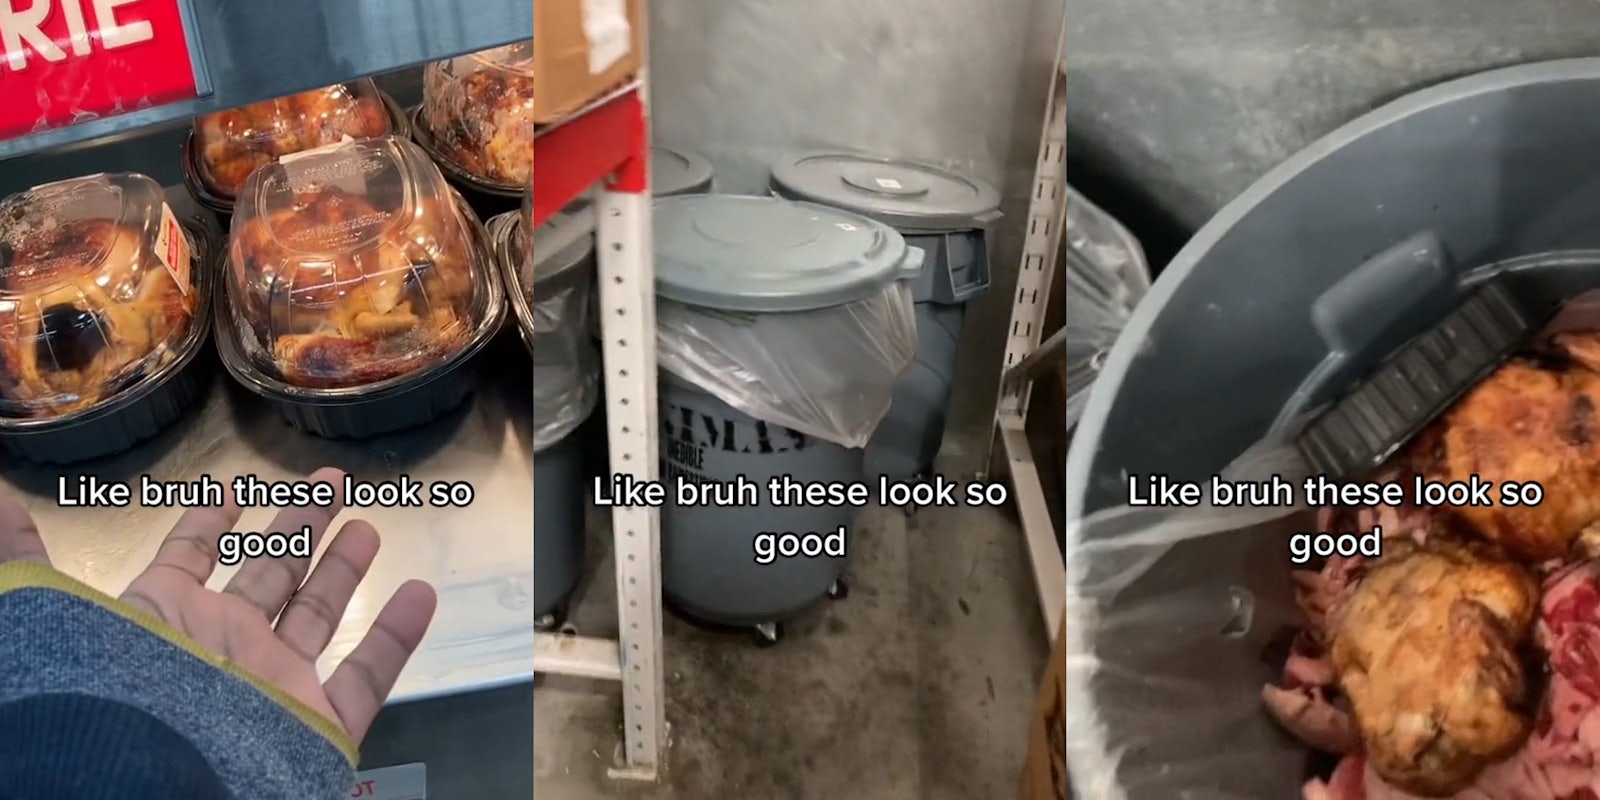 worker's hand out towards rotisserie chickens caption 'Like bruh these look so good' (l) trash cans in corner with caption 'Like bruh these look so good' (c) rotisserie chickens in trash caption 'Like bruh these look so good' (r)